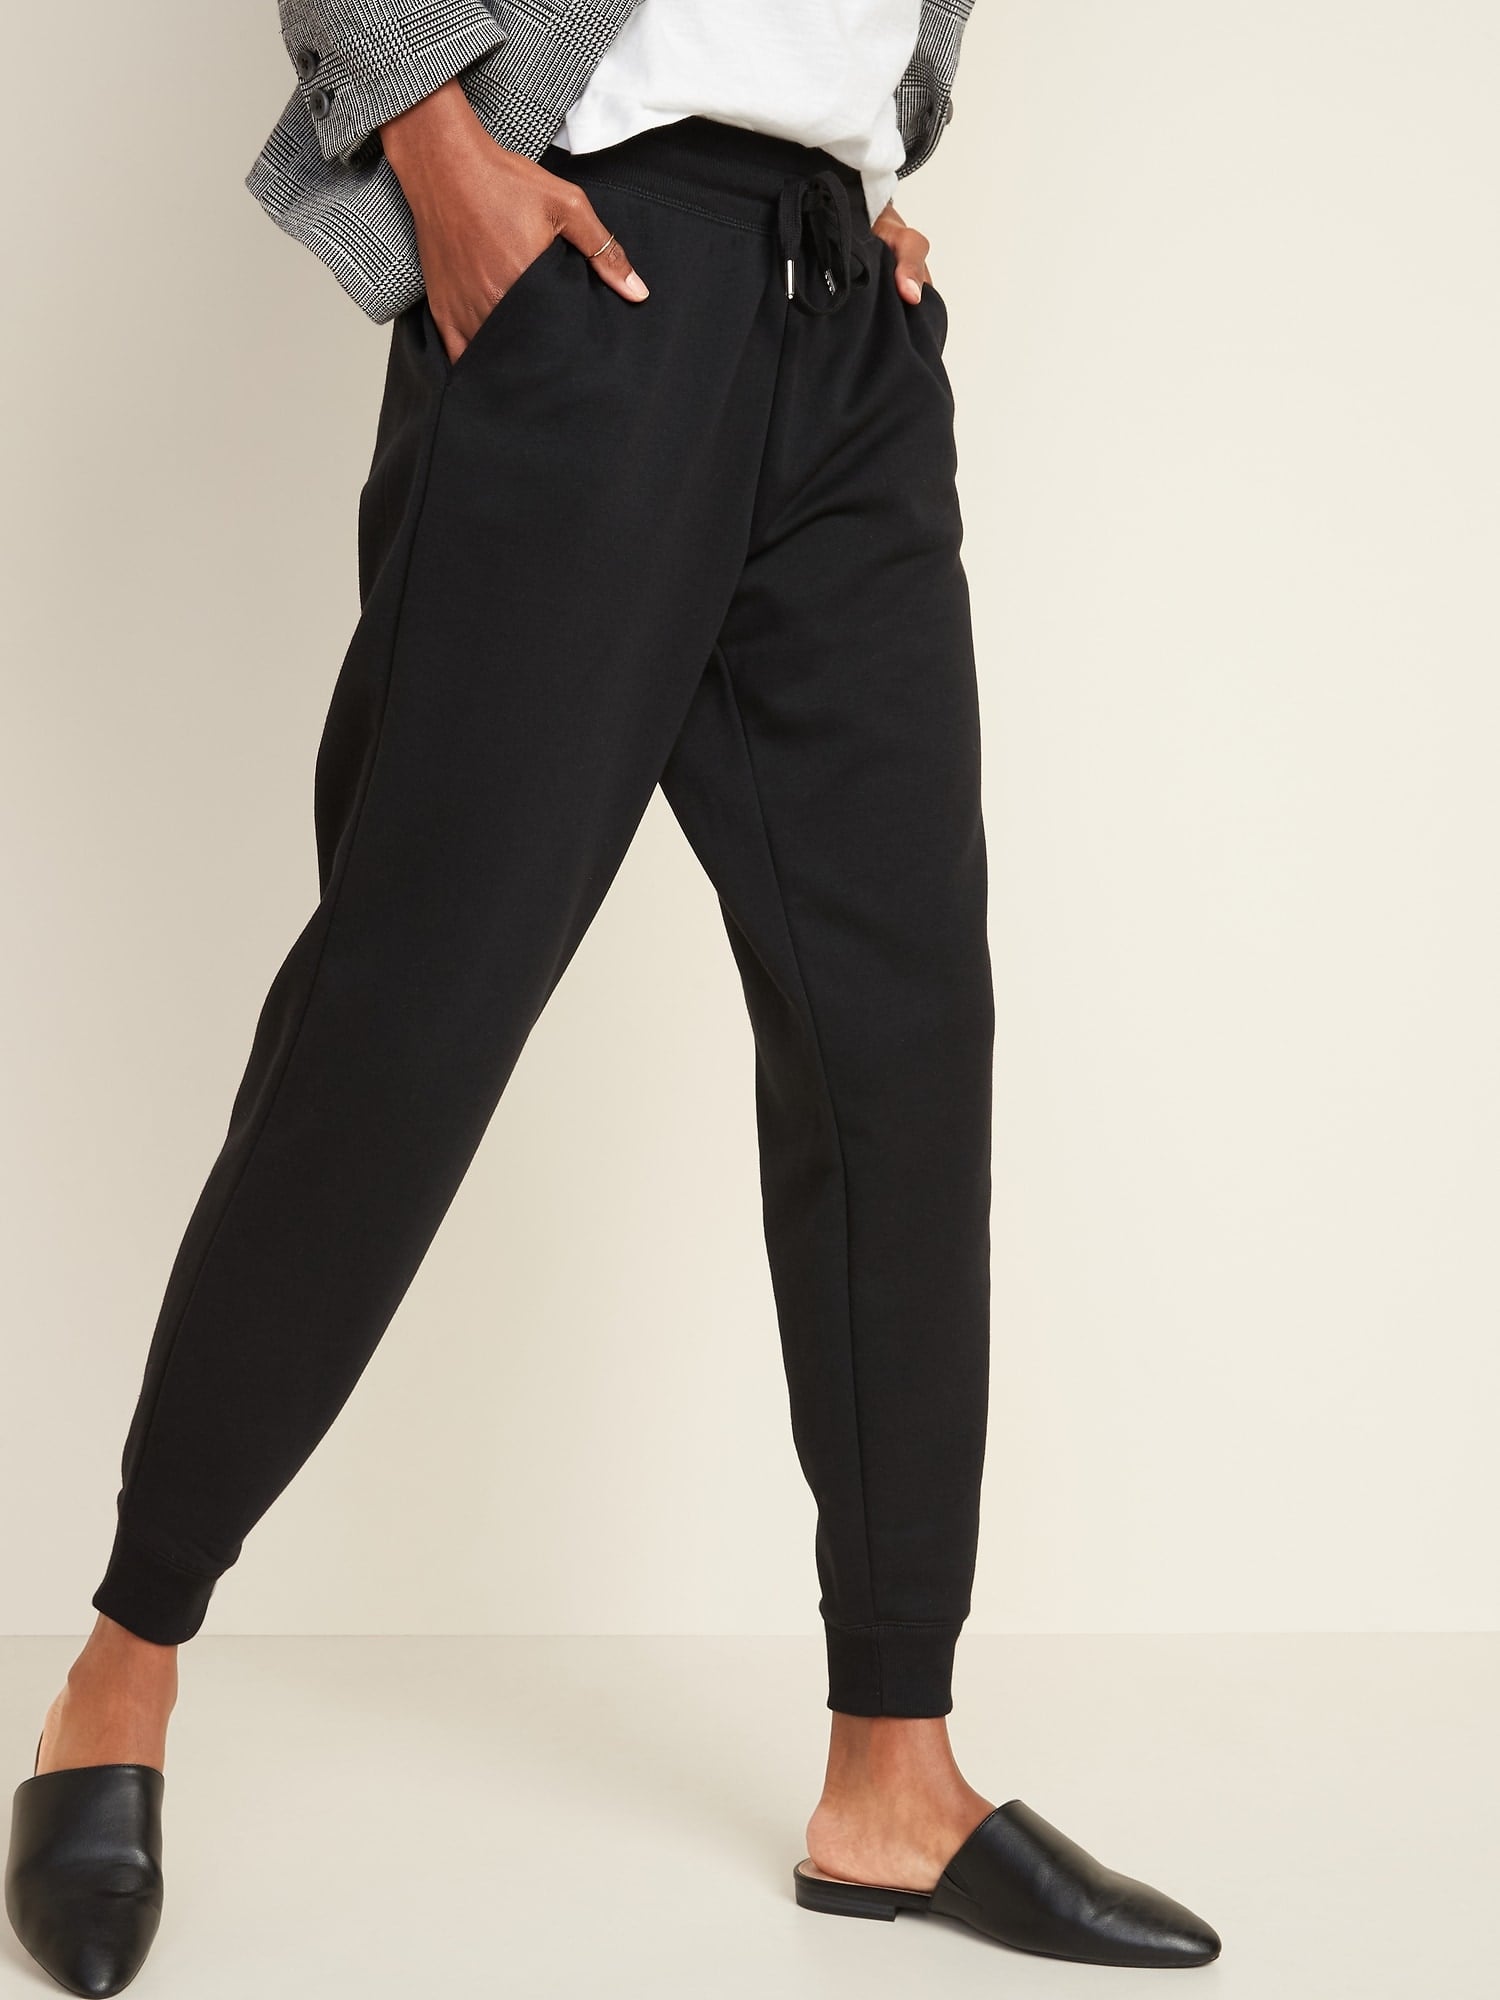 Best Joggers For Women at Old Navy